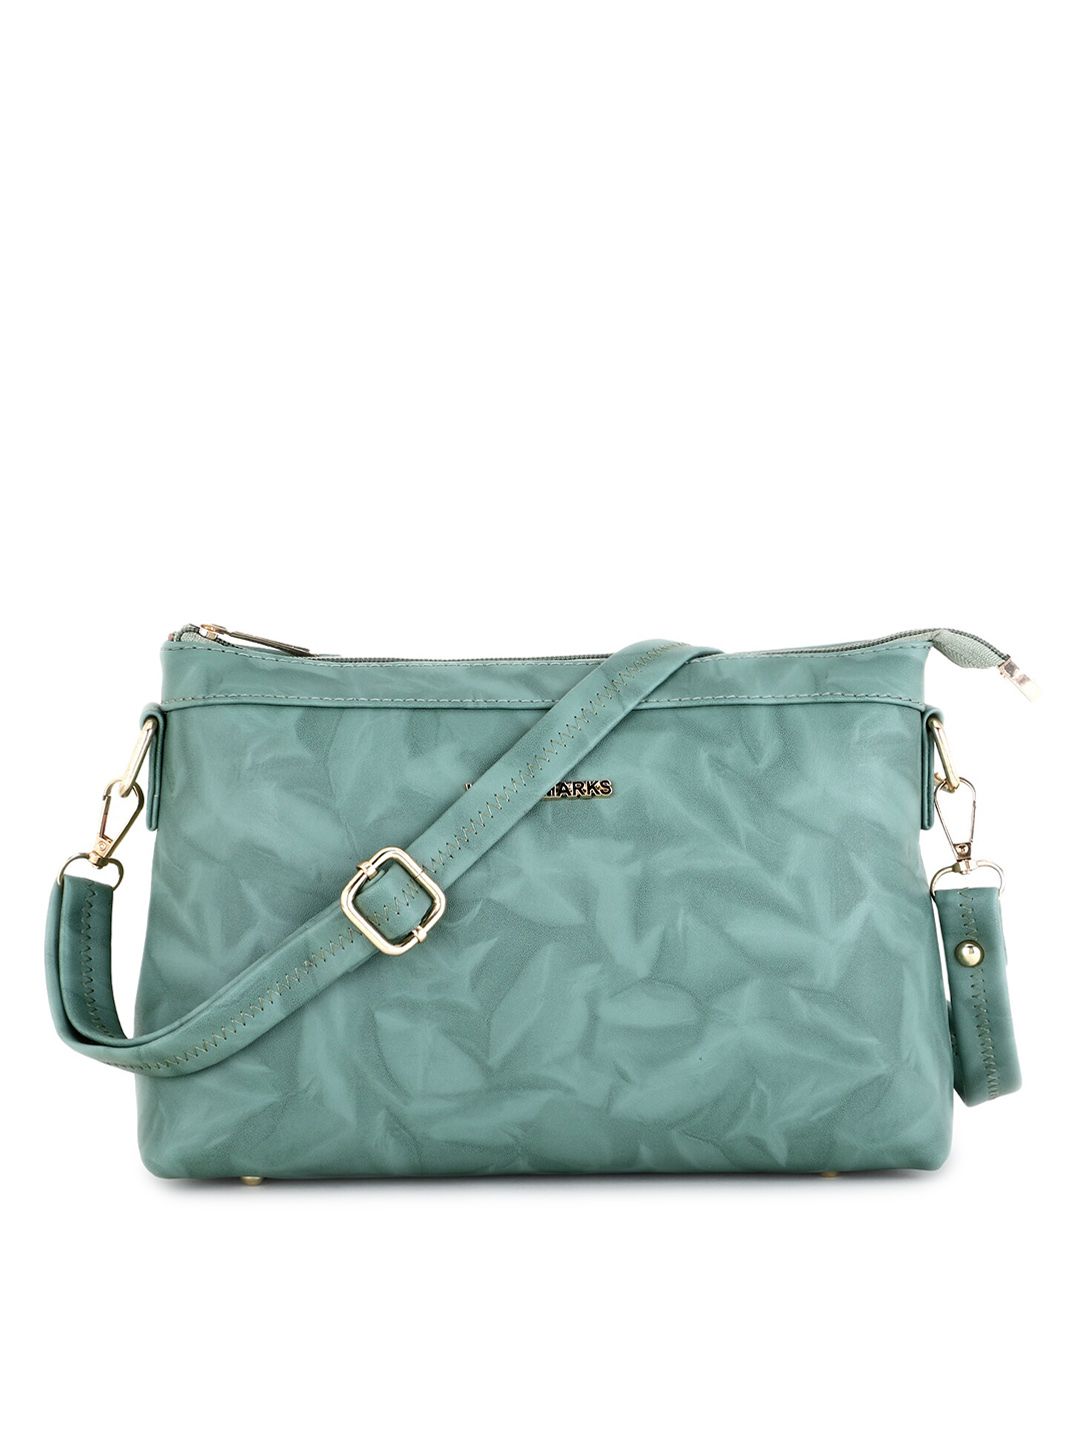 WOMEN MARKS Green PU Oversized Structured Sling Bag With Fringed Price in India